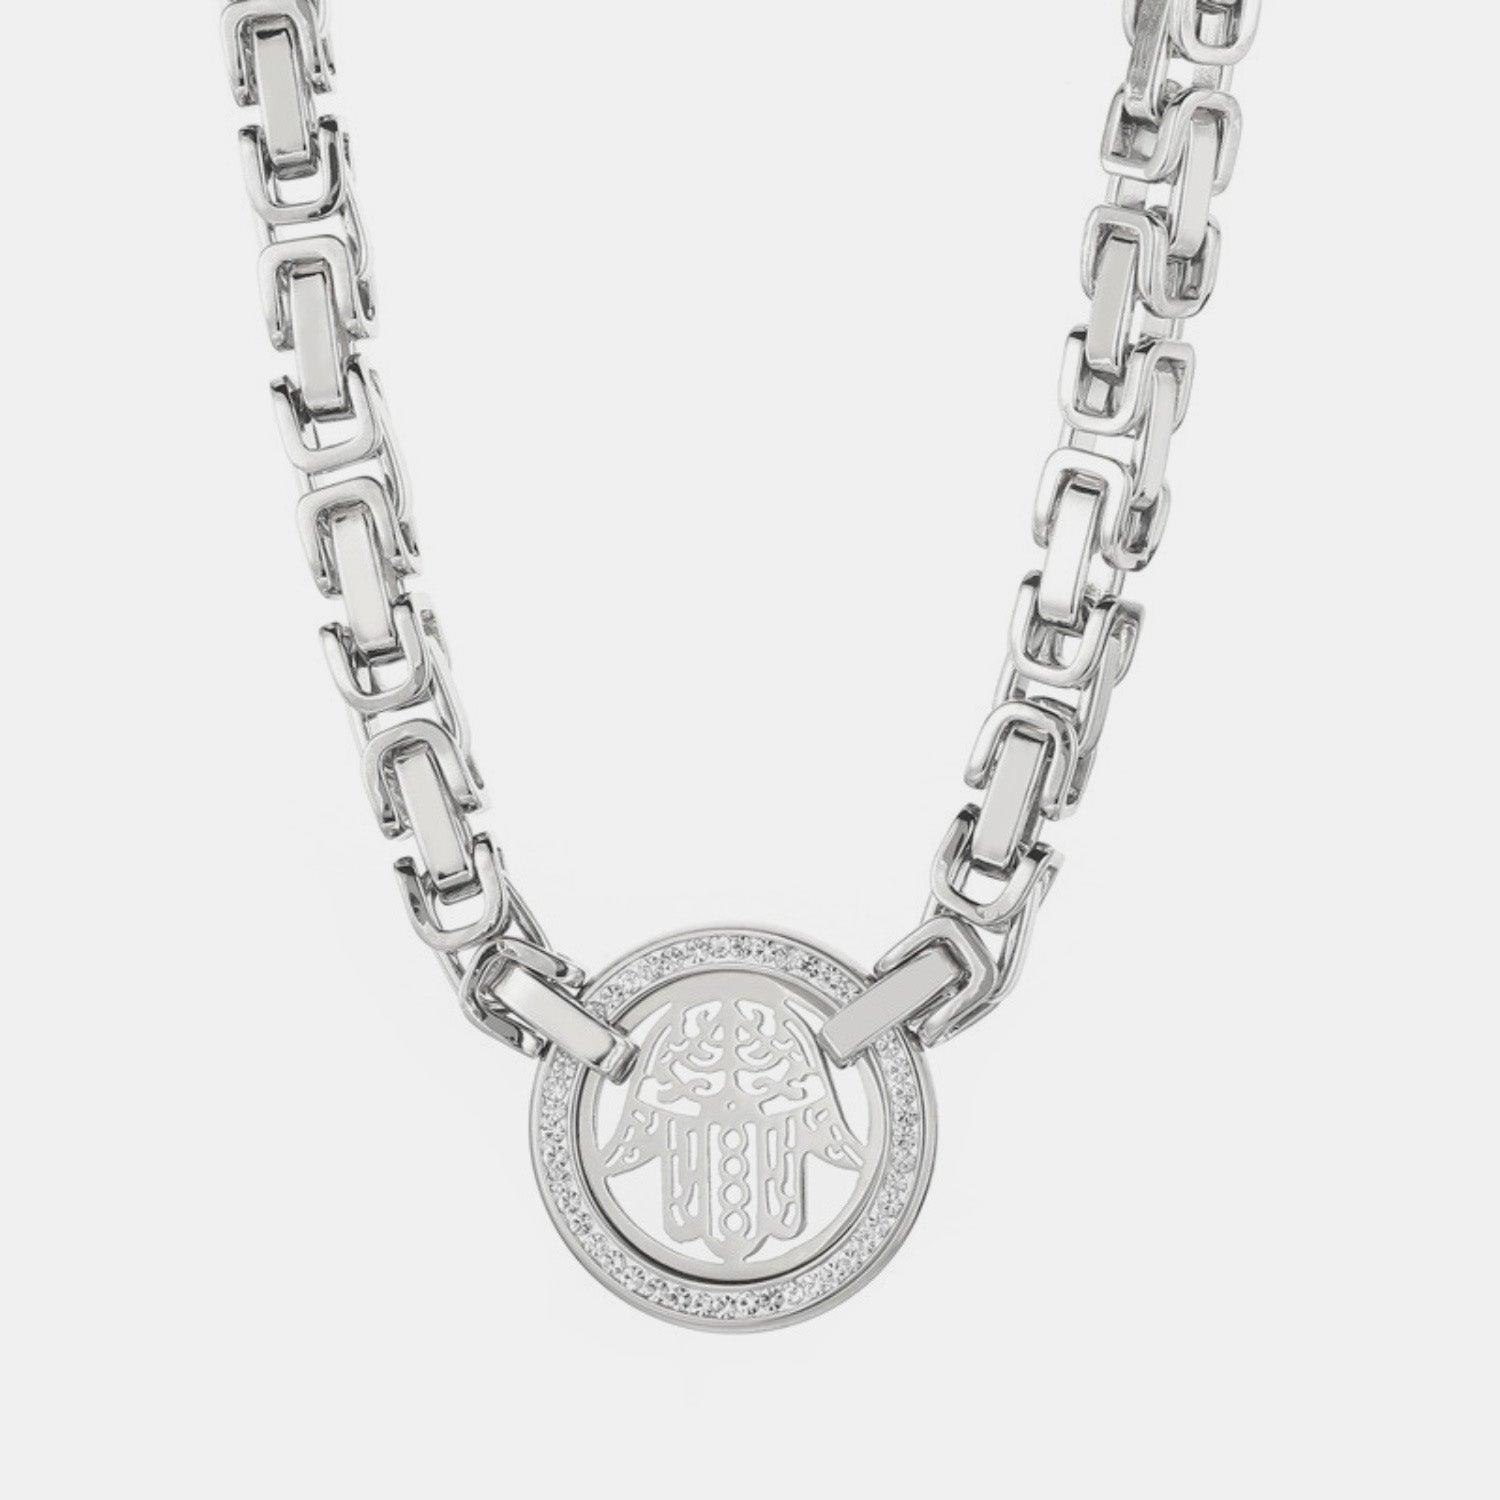 a silver chain with a medallion on it